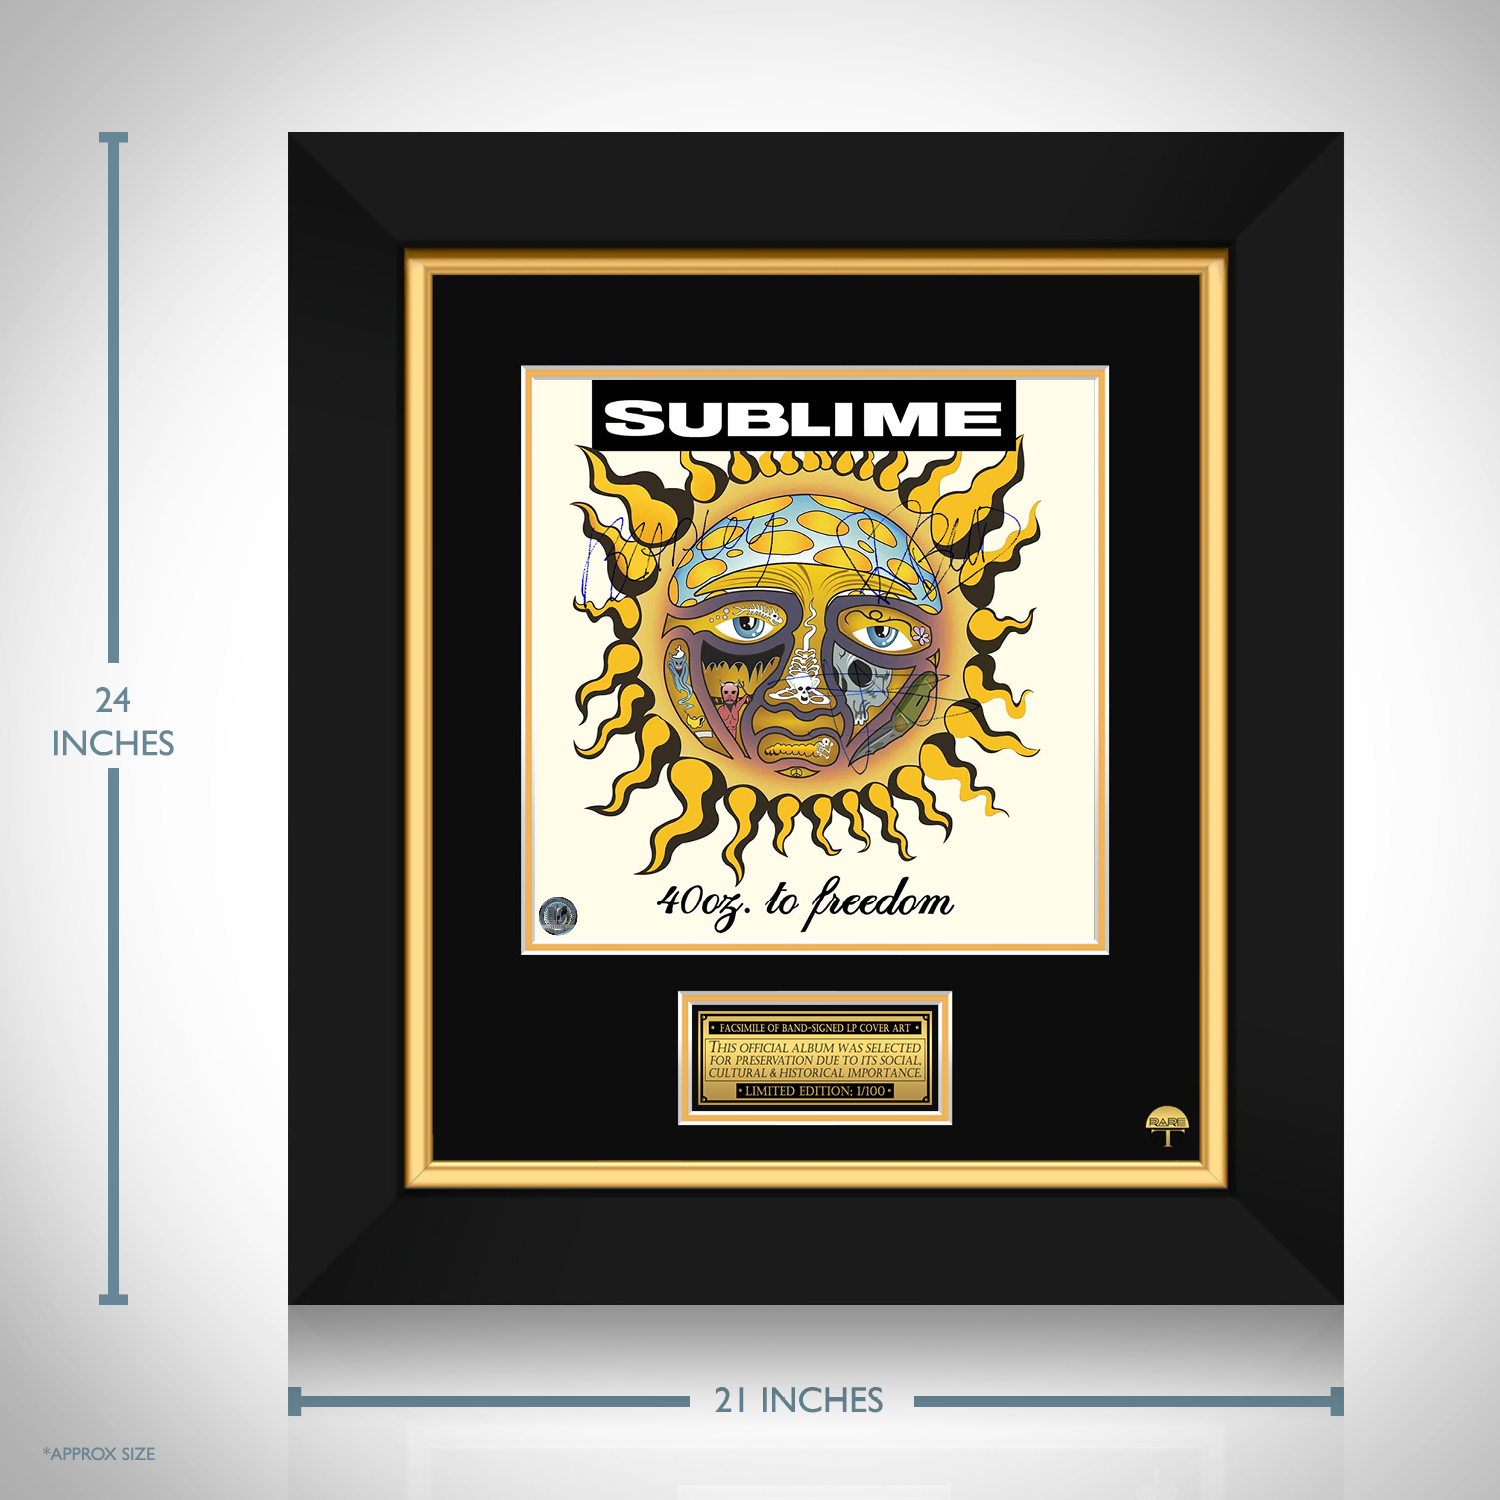 Sublime - 40oz Of Freedom LP Cover Limited Signature Edition 